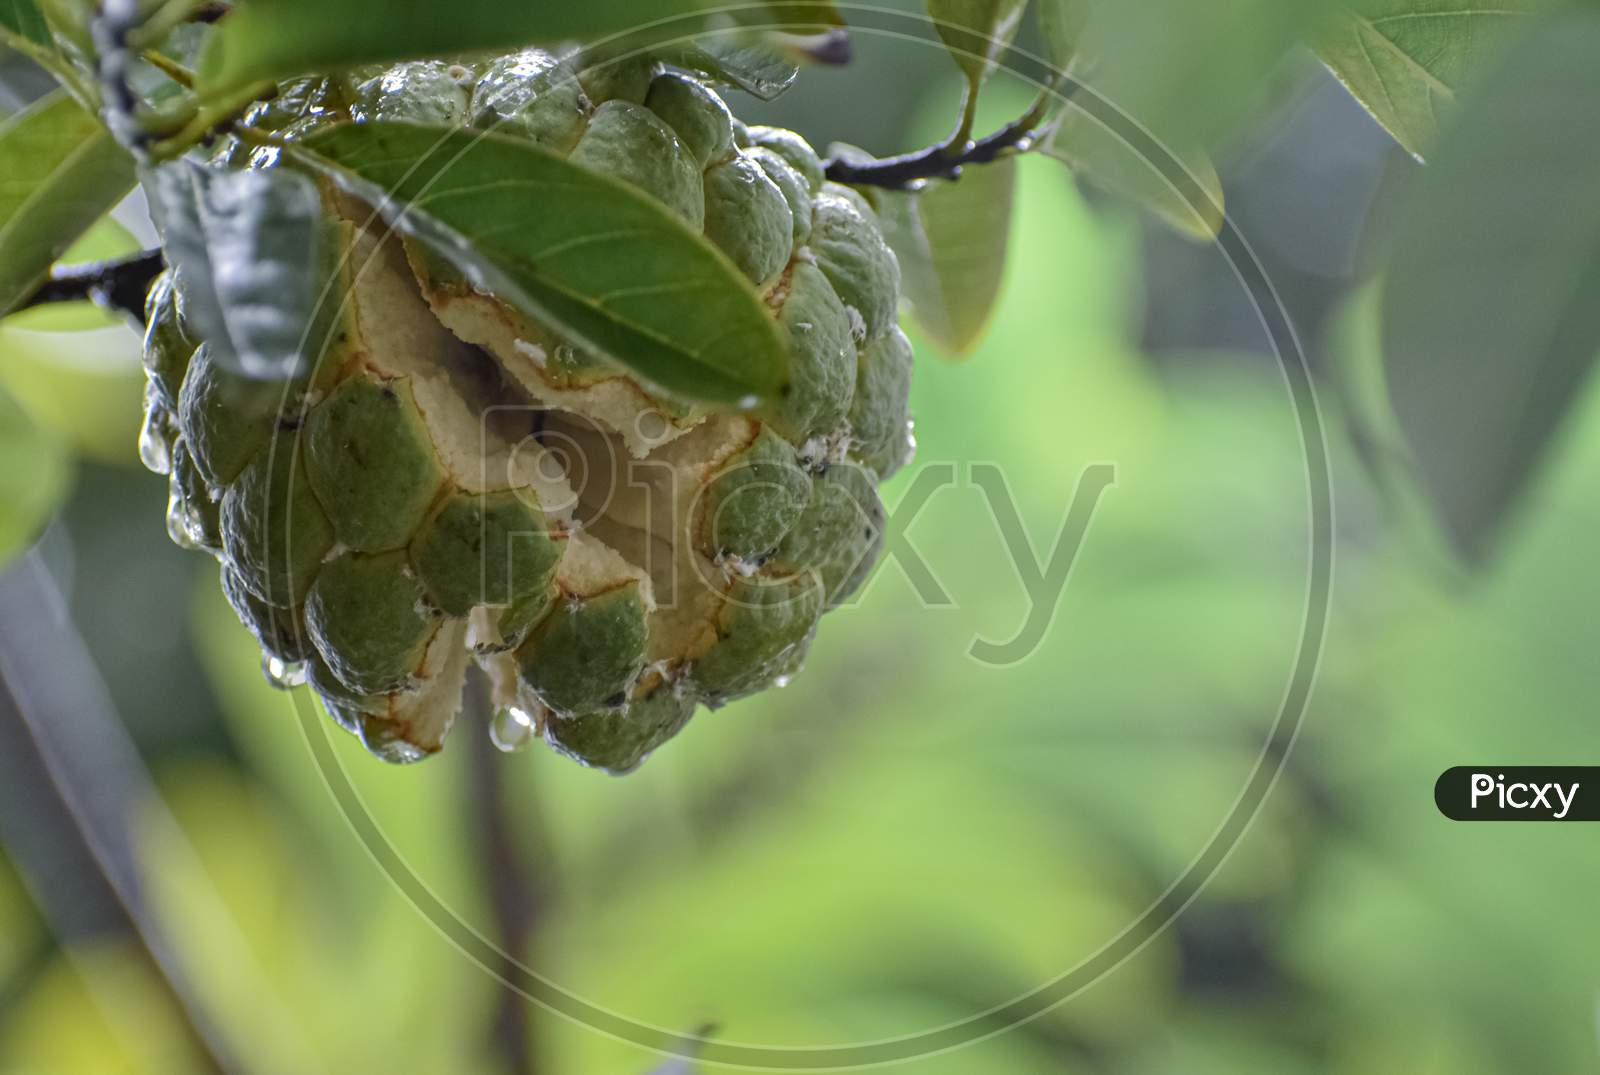 A wet sugar apple on the tree branch with blurry leaves.